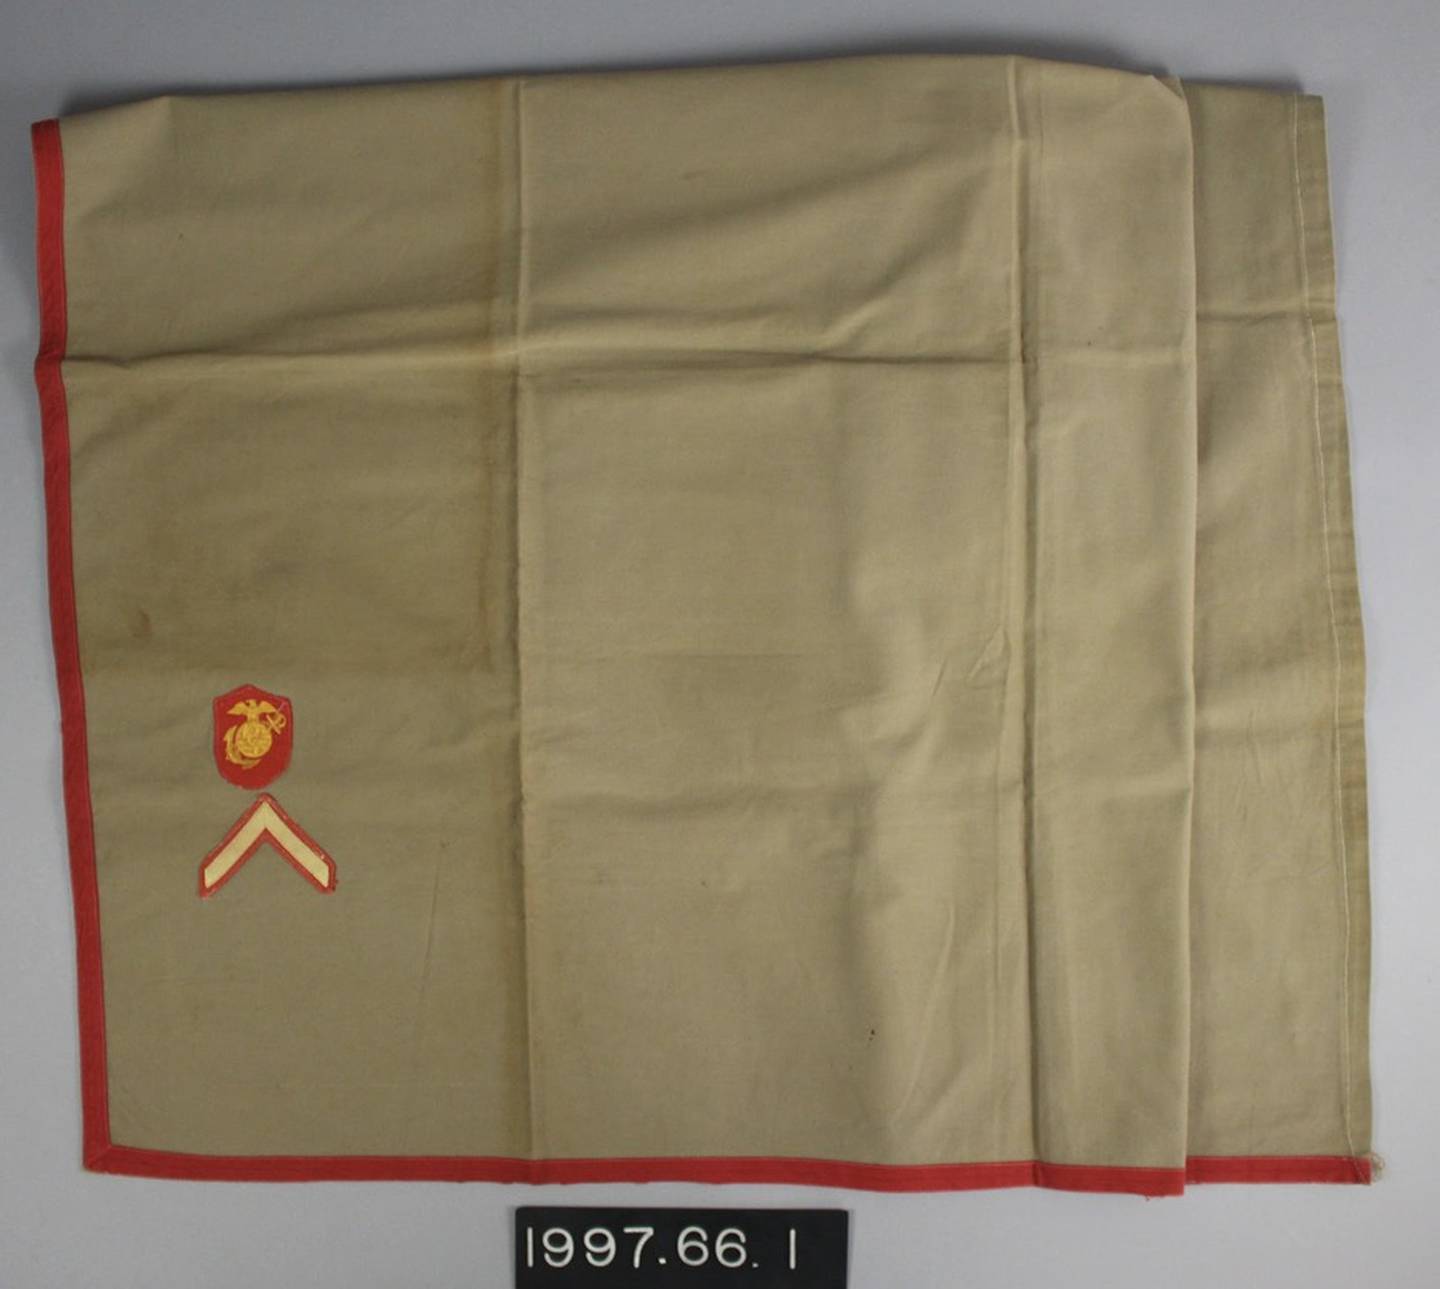 The Lava-Lava is made of a thick cotton canvas fabric. It is wrapped around the Marine’s waist and folded tightly in place. A red sash or cartridge belt assists in keeping it firmly in place. (Collection of the National Museum of the Marine Corps)